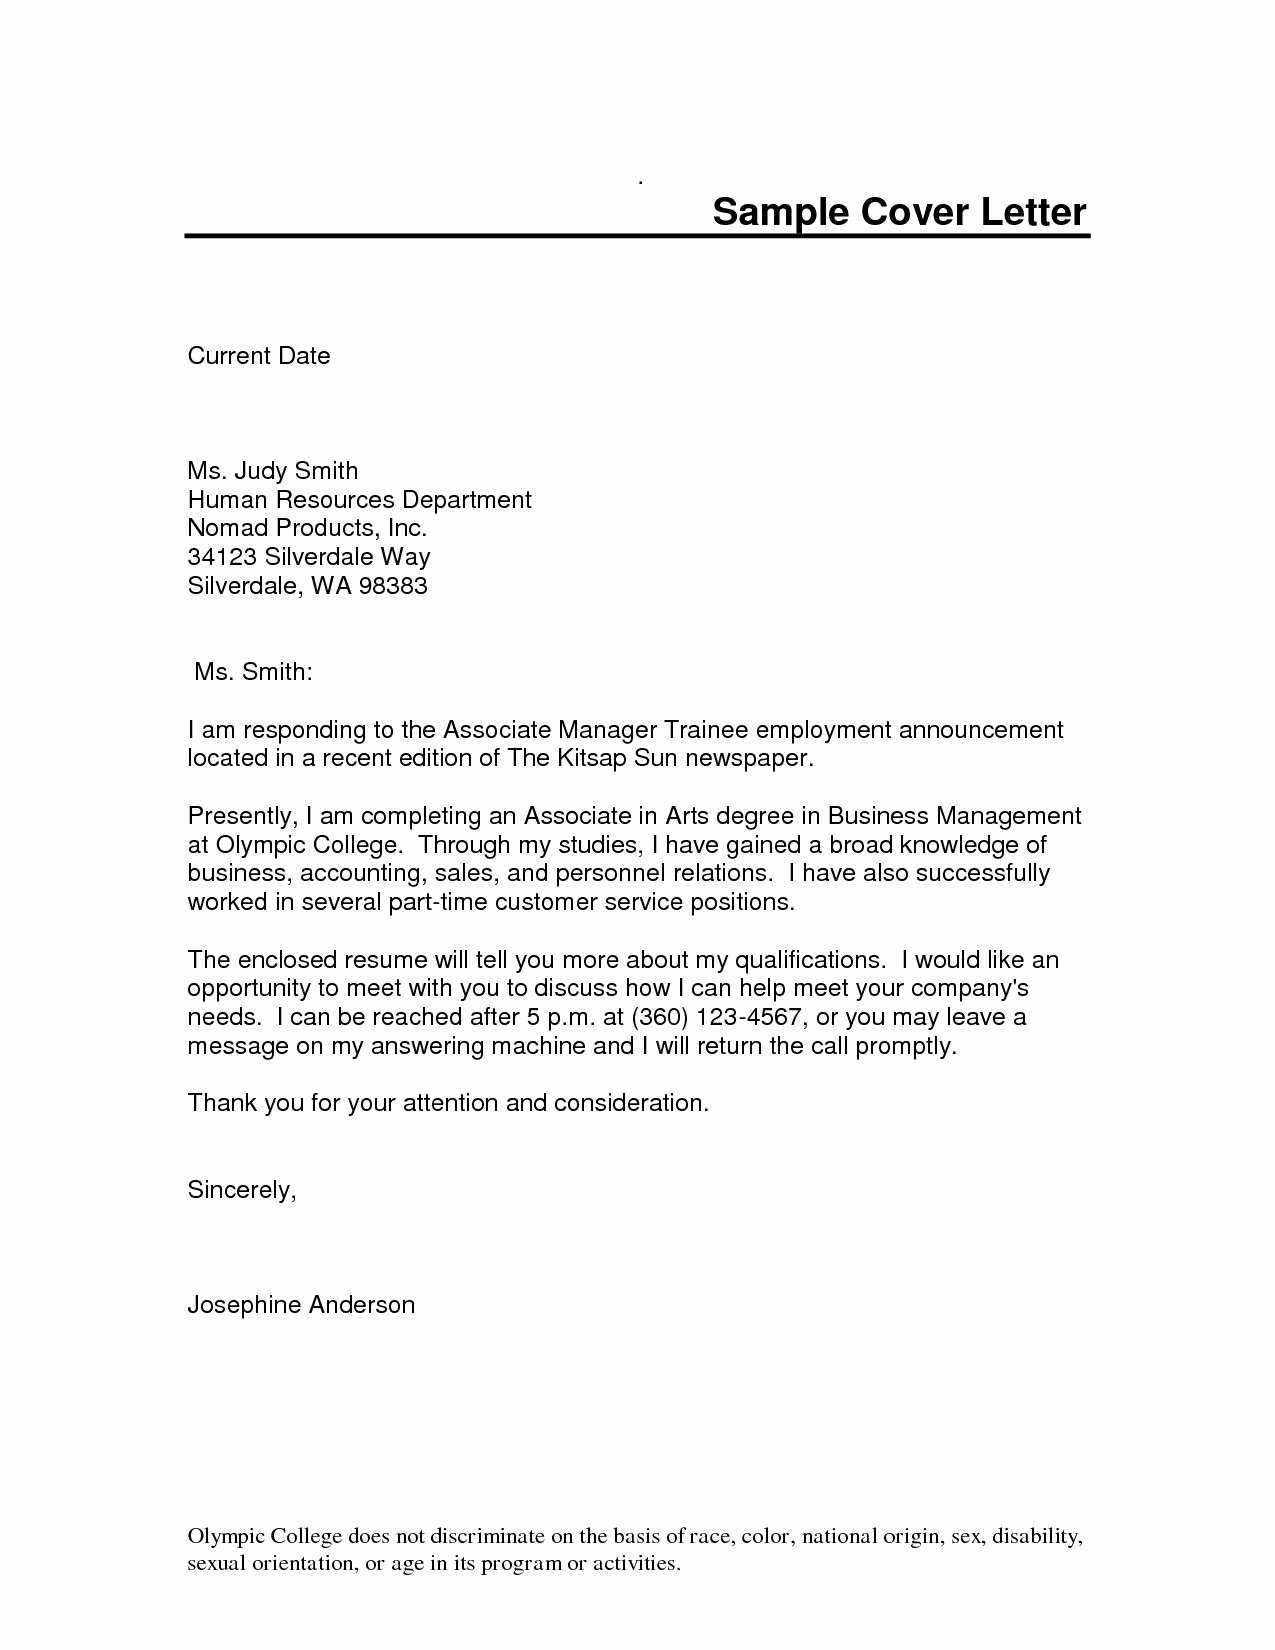 Letter Of Interest Template Word Awesome Free Cover Letter Template Microsoft Word Whats Cover